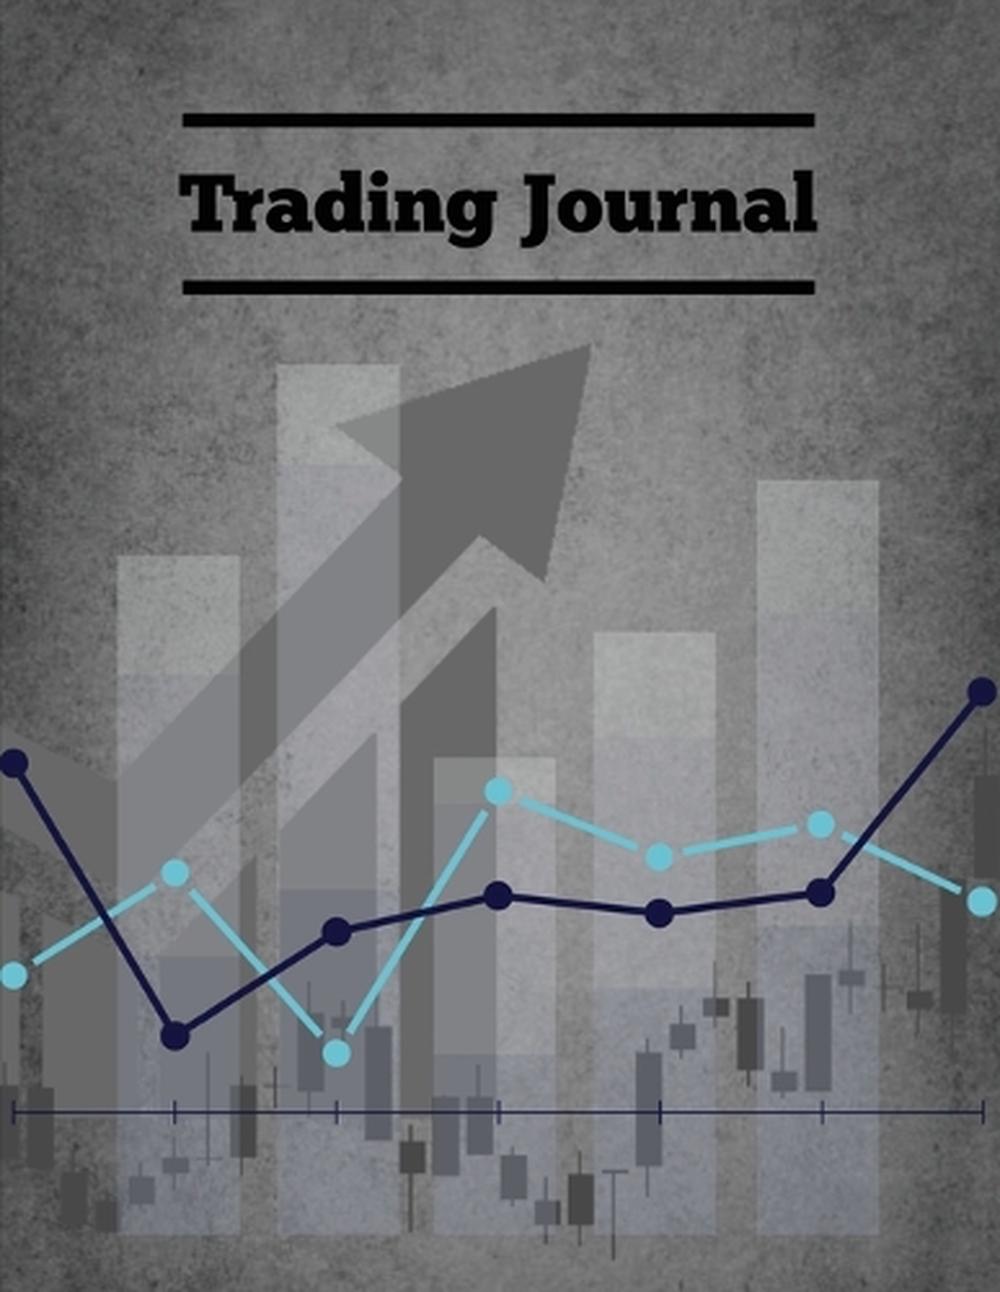 Free online trading journal